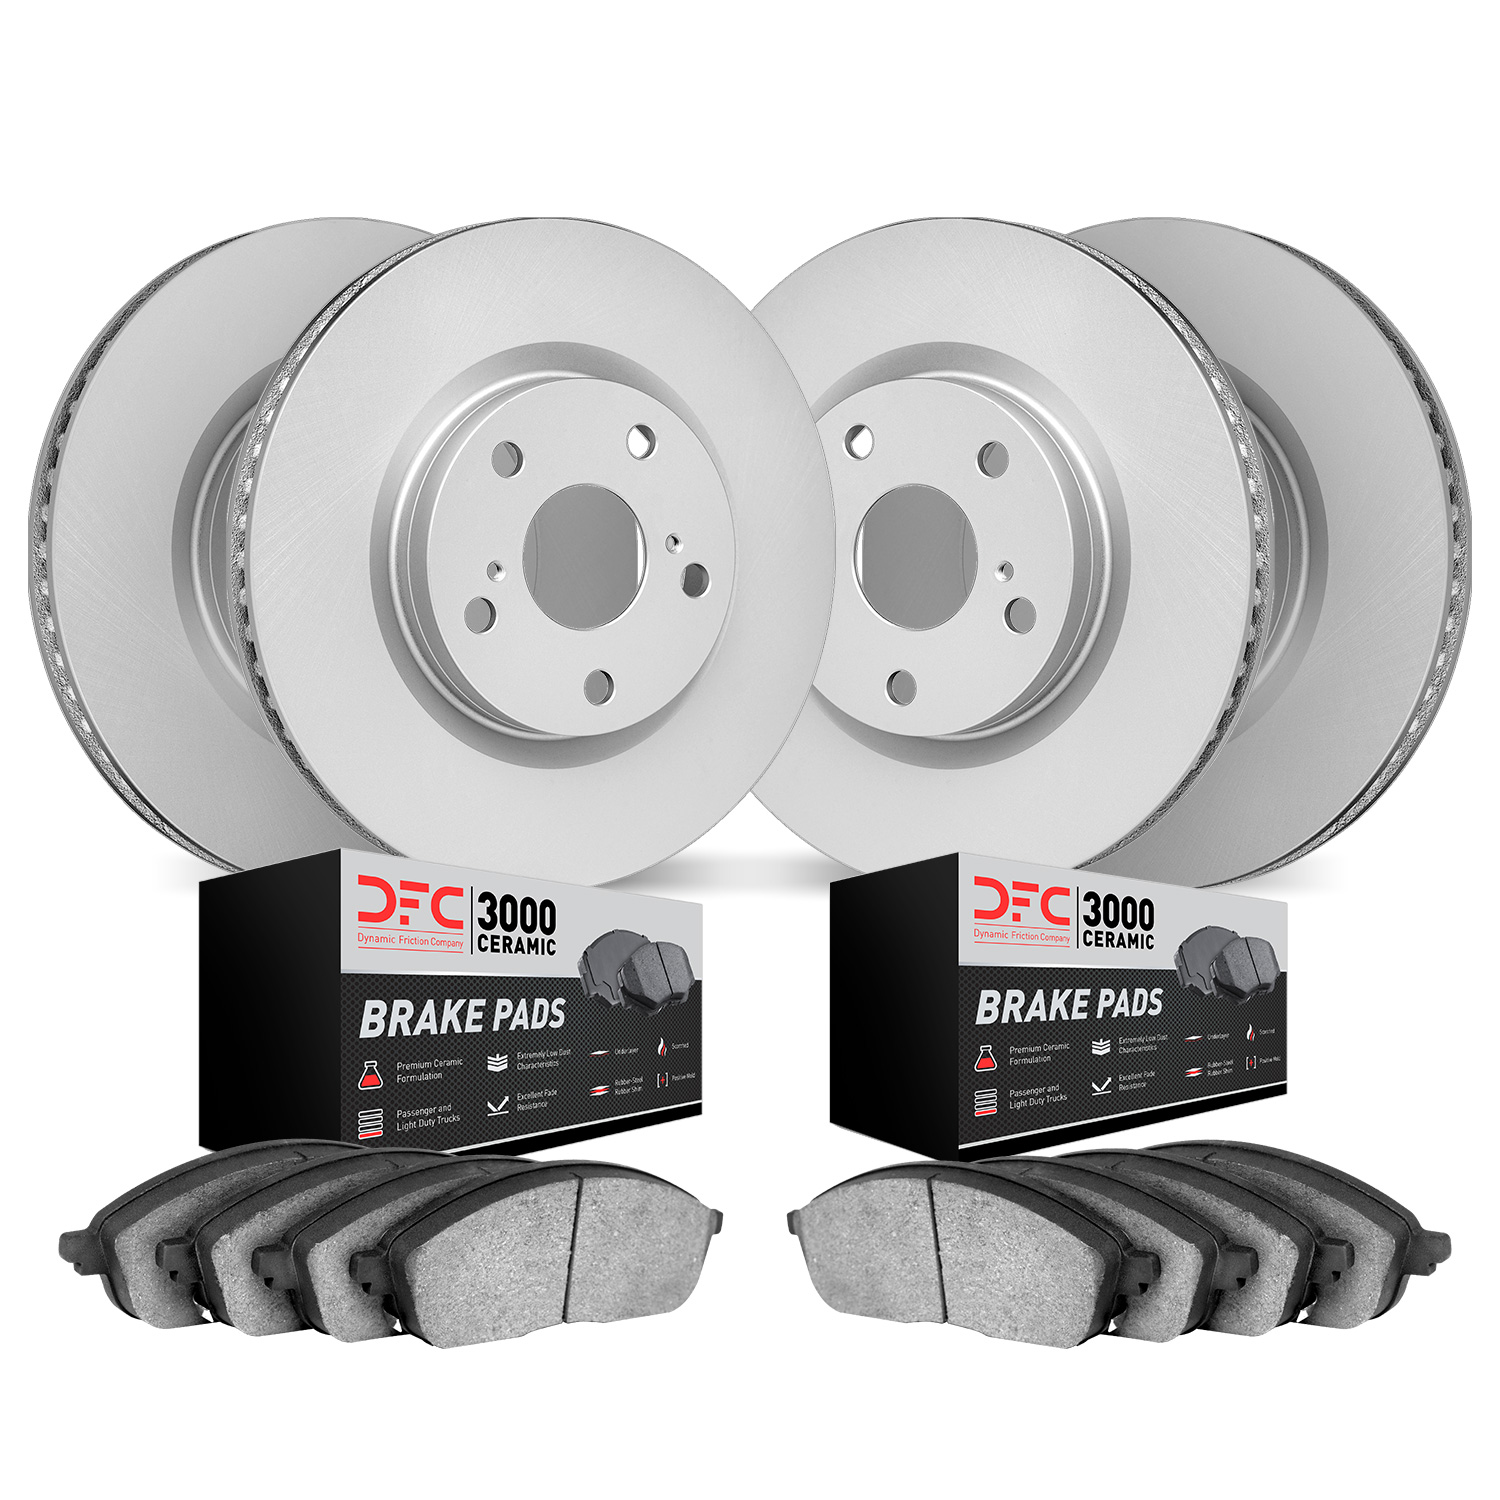 4304-76041 Geospec Brake Rotors with 3000-Series Ceramic Brake Pads Kit, 2010-2013 Lexus/Toyota/Scion, Position: Front and Rear